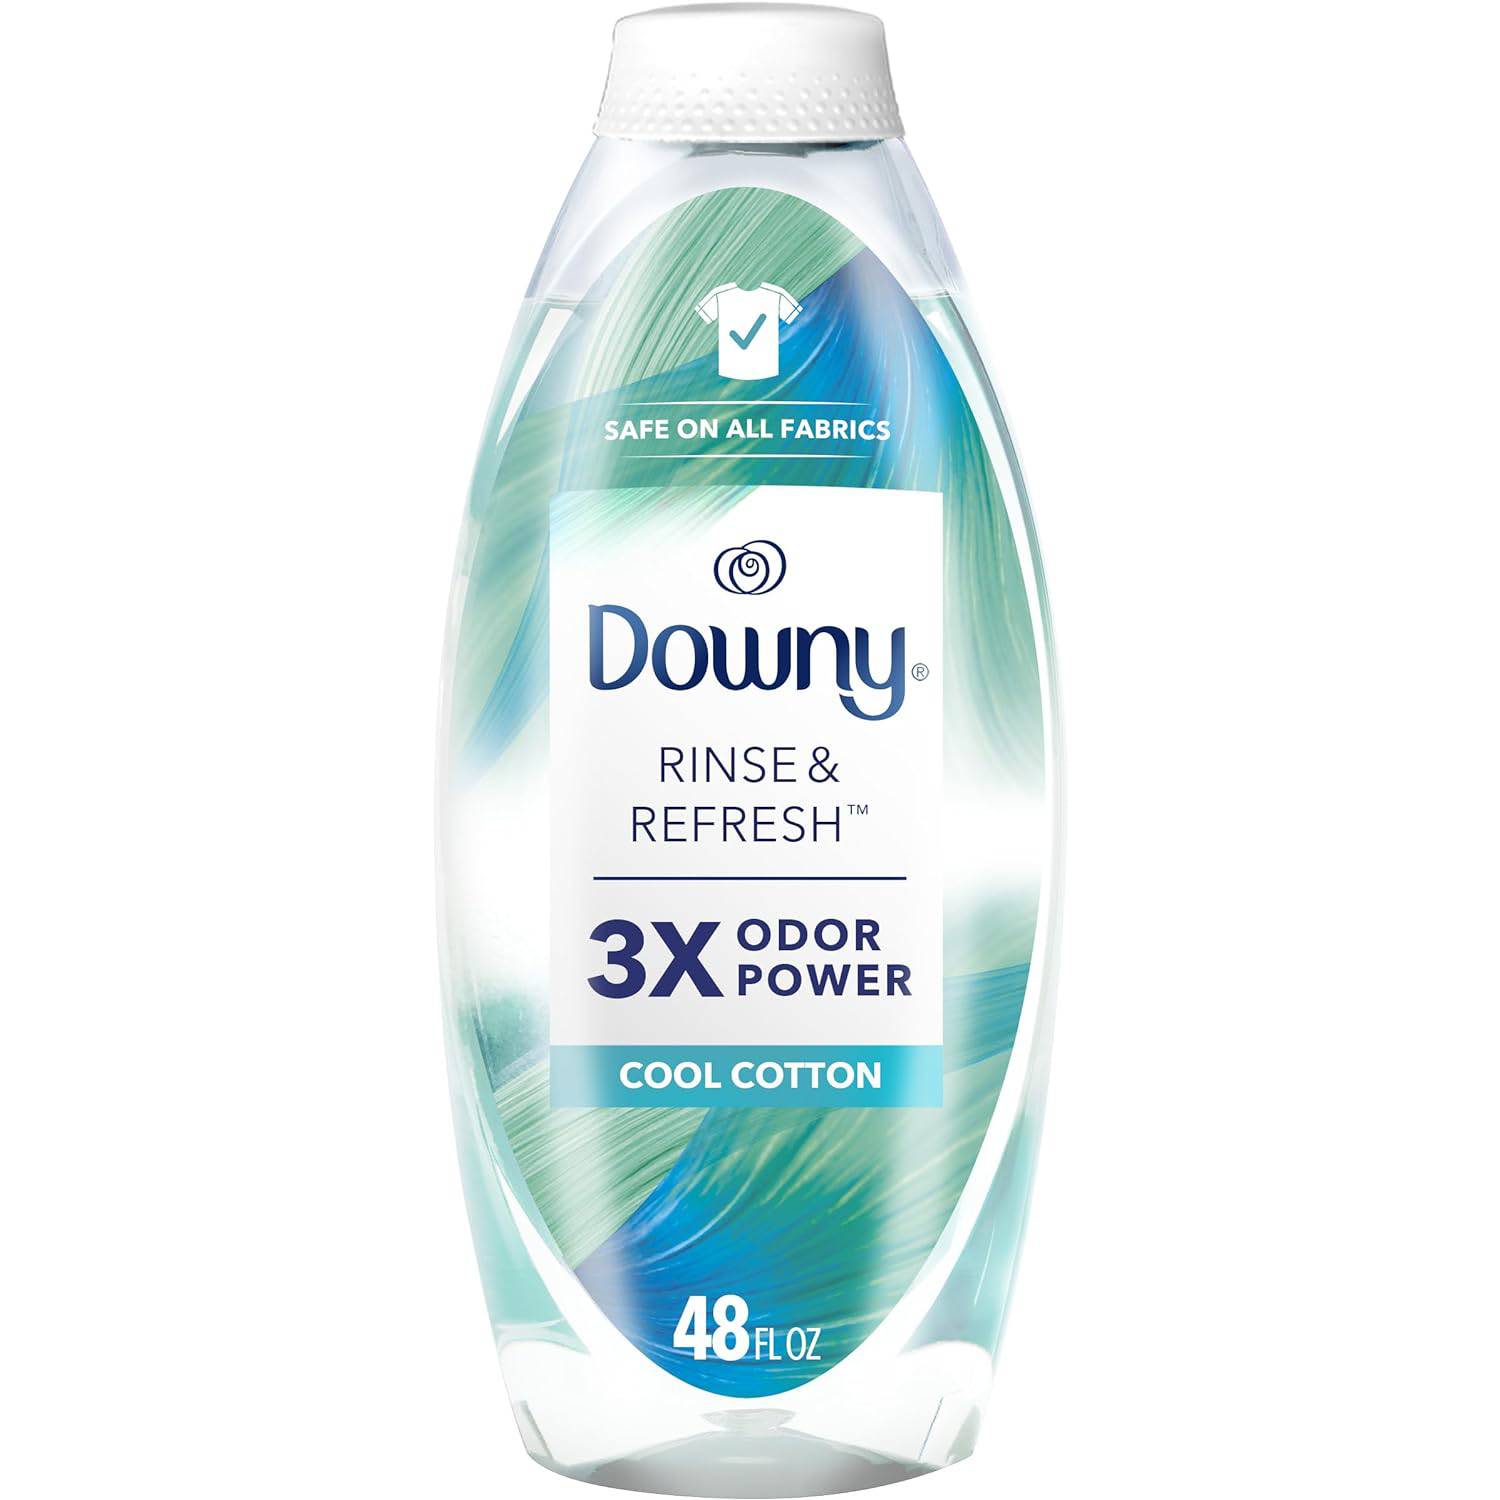 Downy Rinse & Refresh Laundry Review